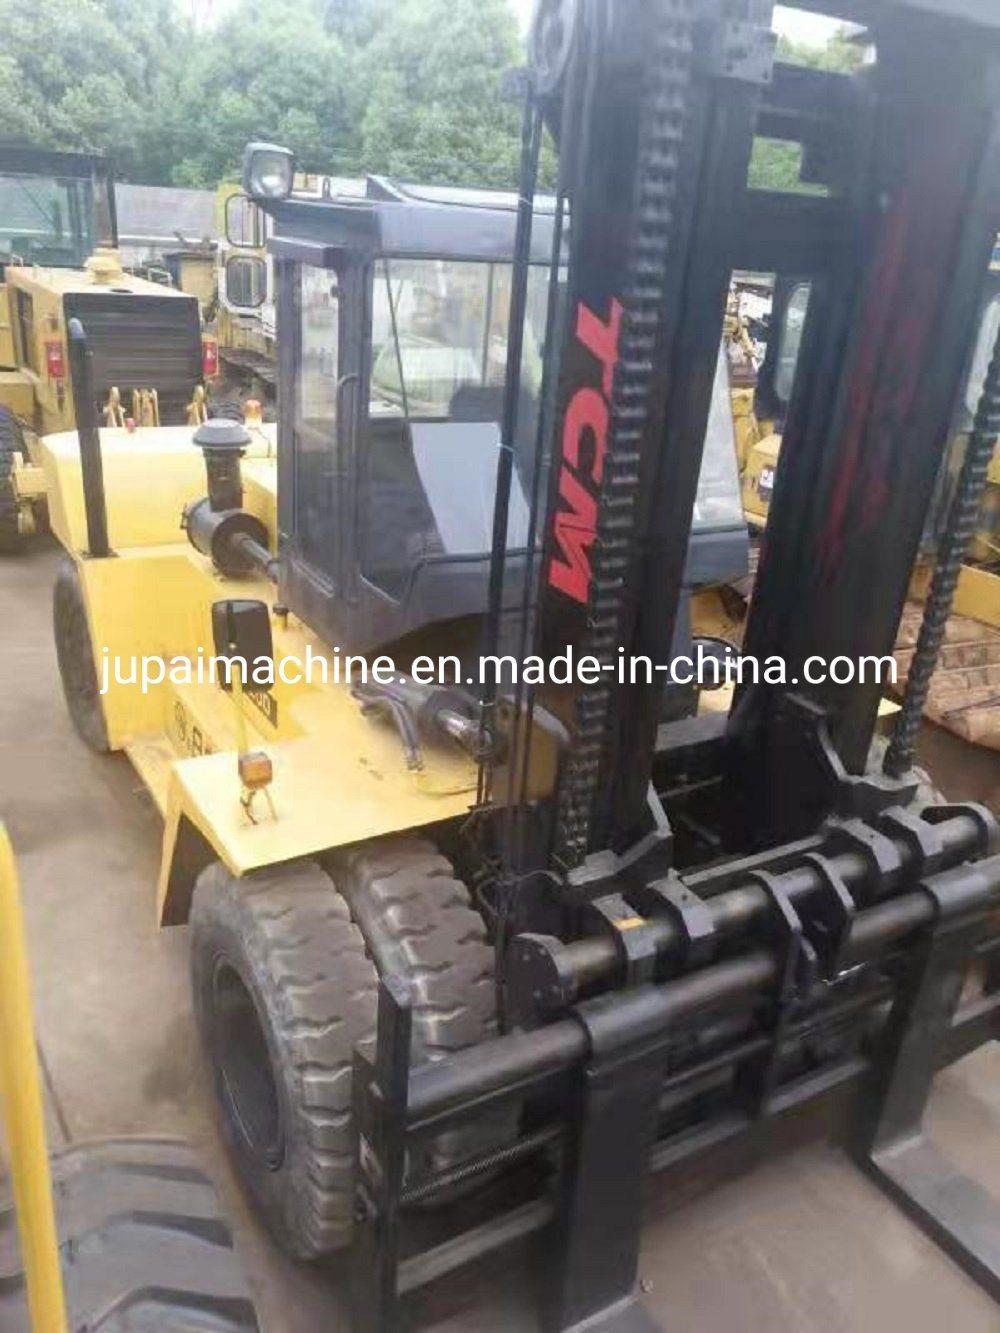 Low Price Good Quality Tcm 20 Ton Second-Hand Diesel Forklift Lifting Equipment Transport Forklift Fast Delivery